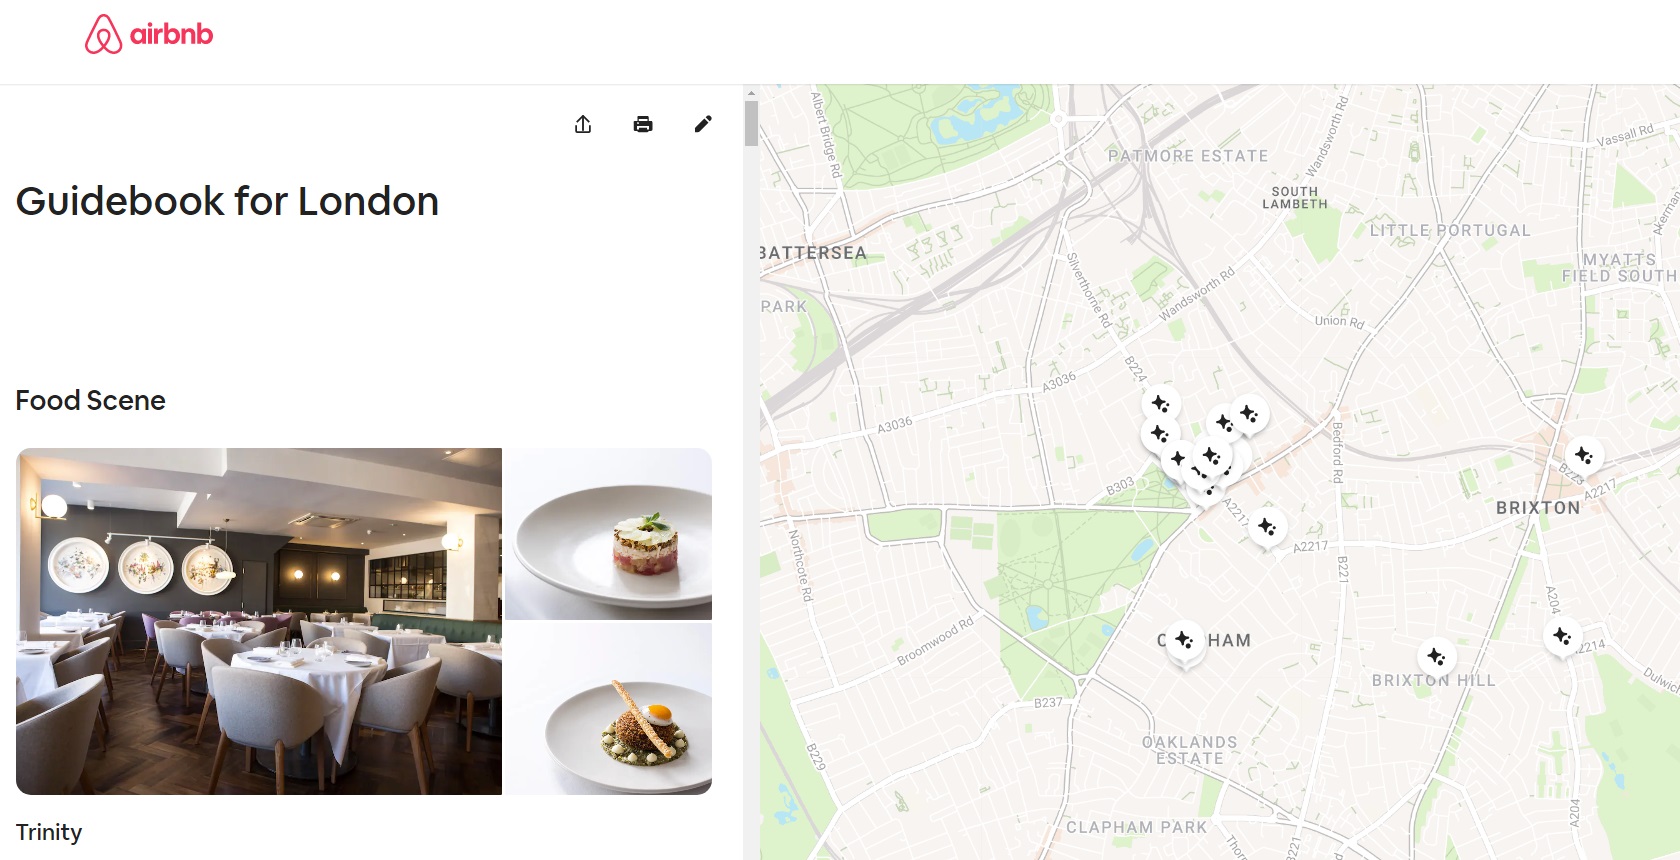 A preview of a typical Airbnb guidebook with listings on one side and map on the other